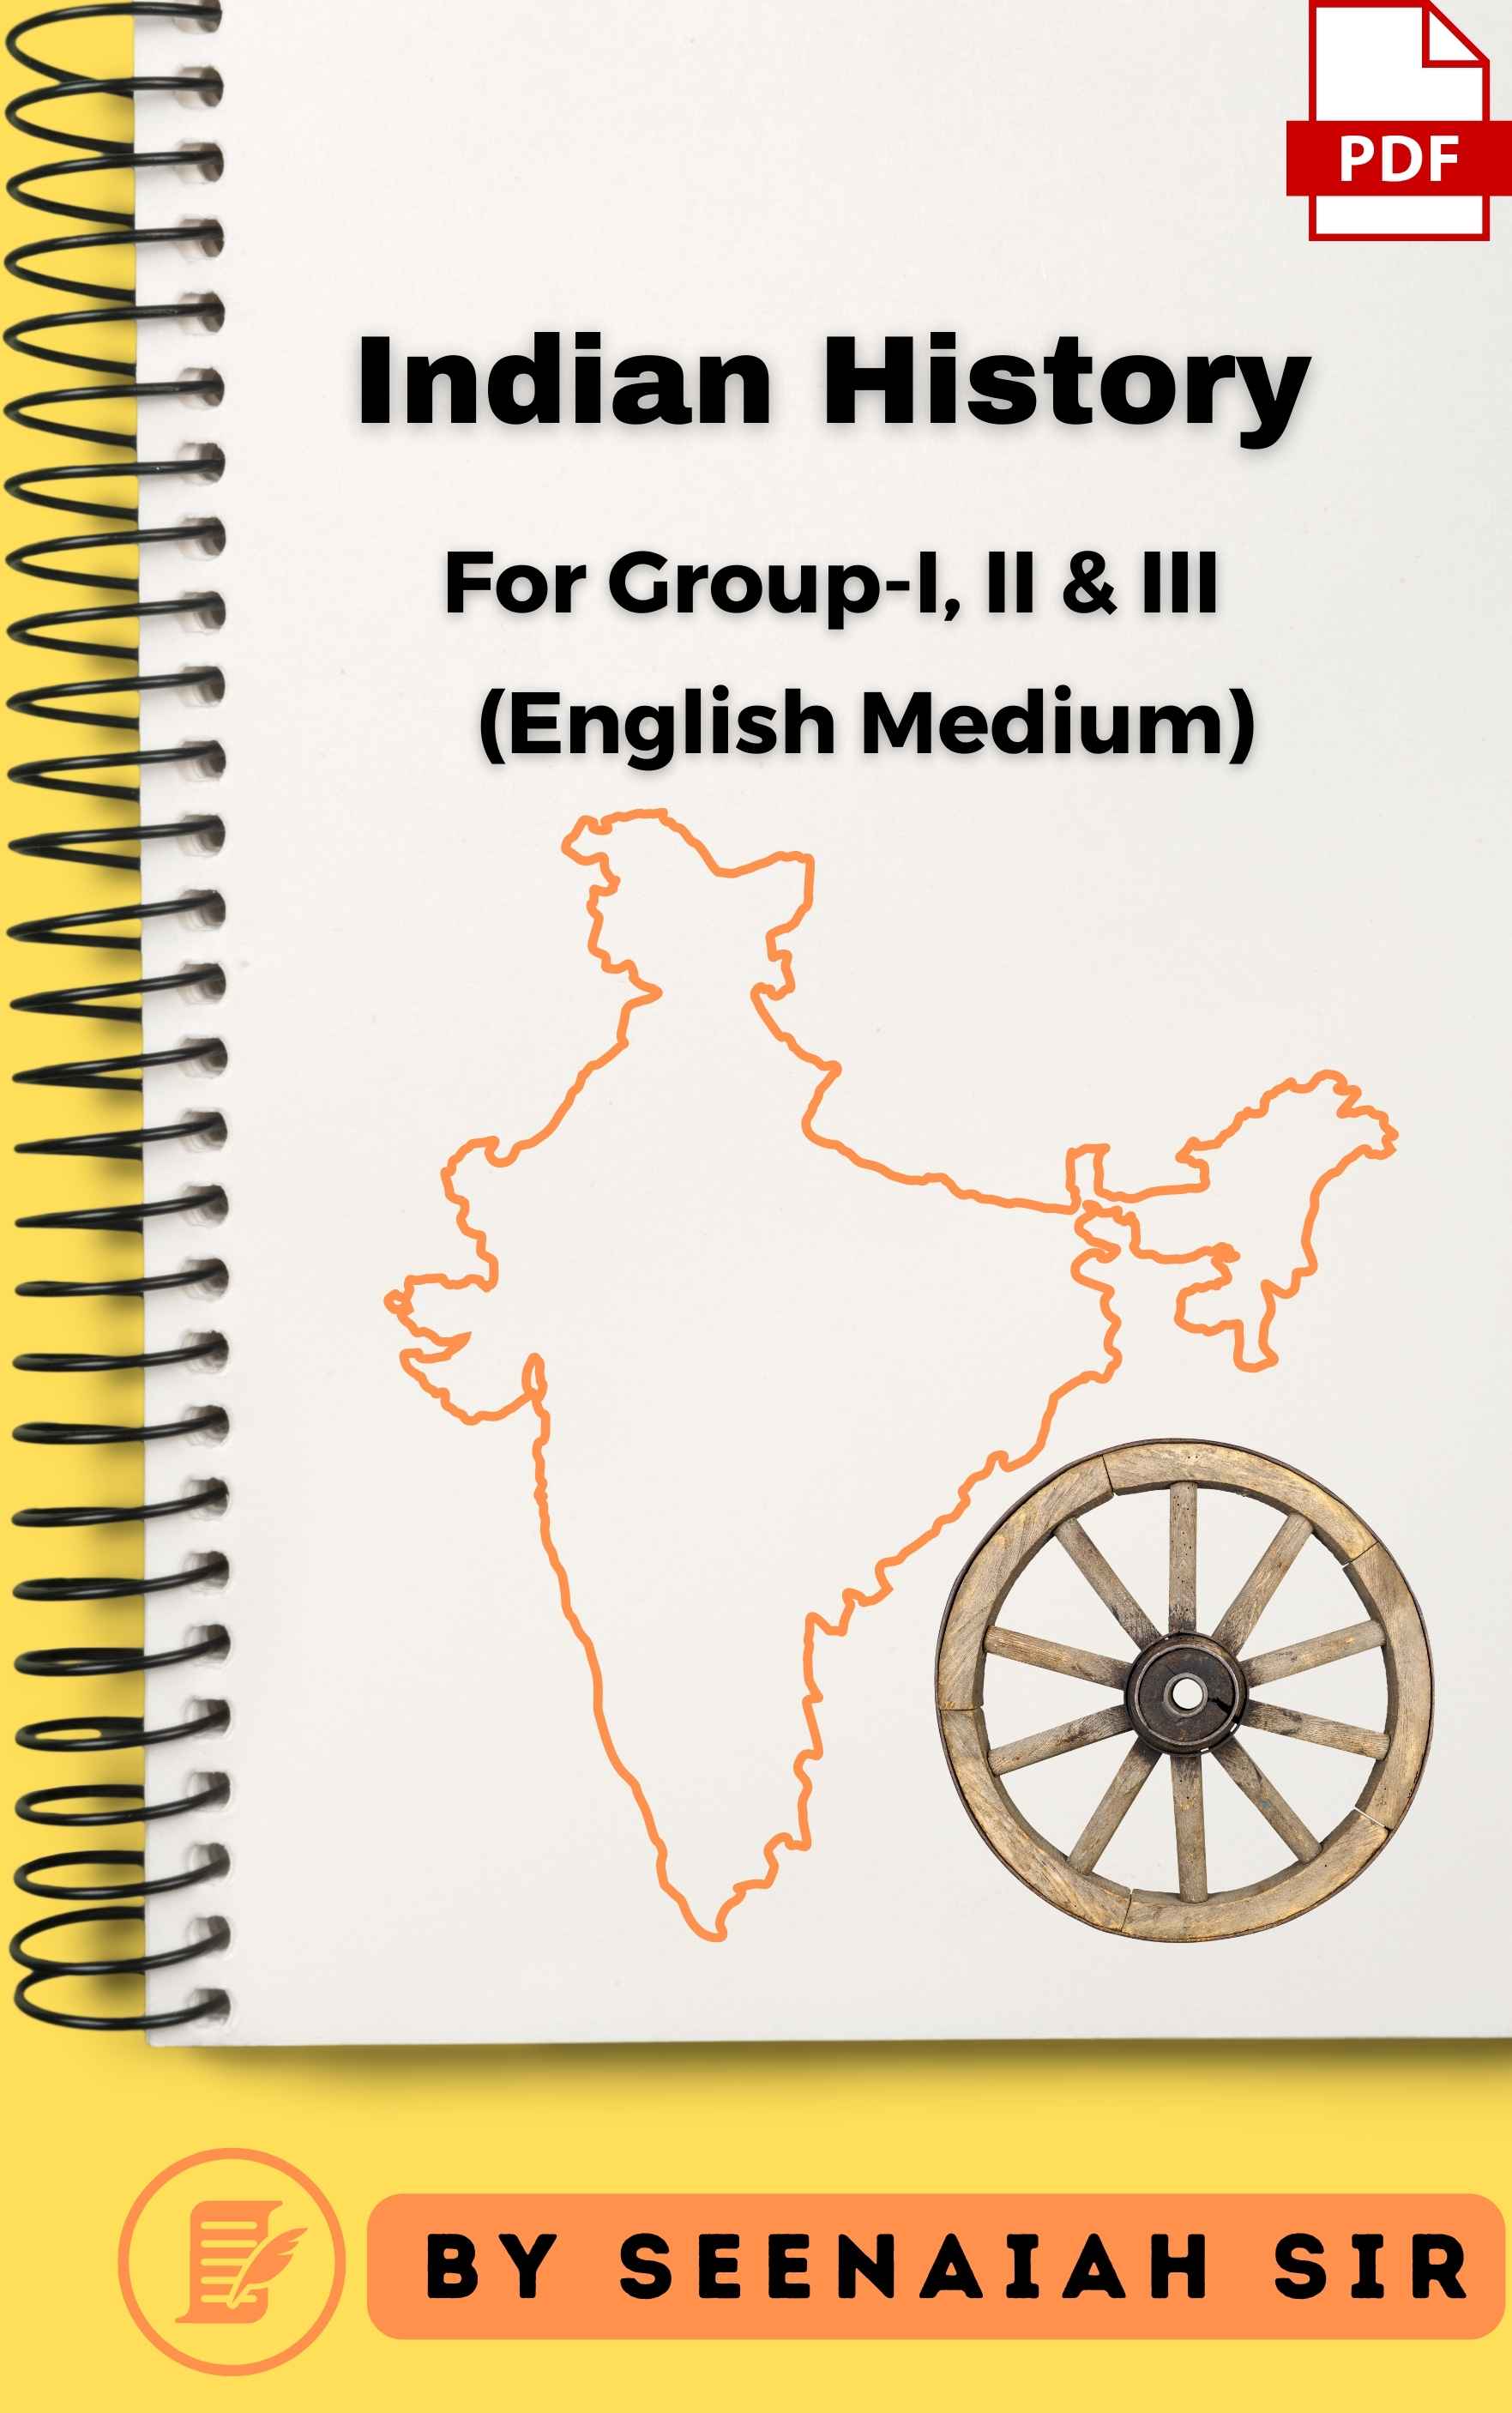 Indian History for Group-I, II & III (Hand Written Class Notes English Medium) - PDF